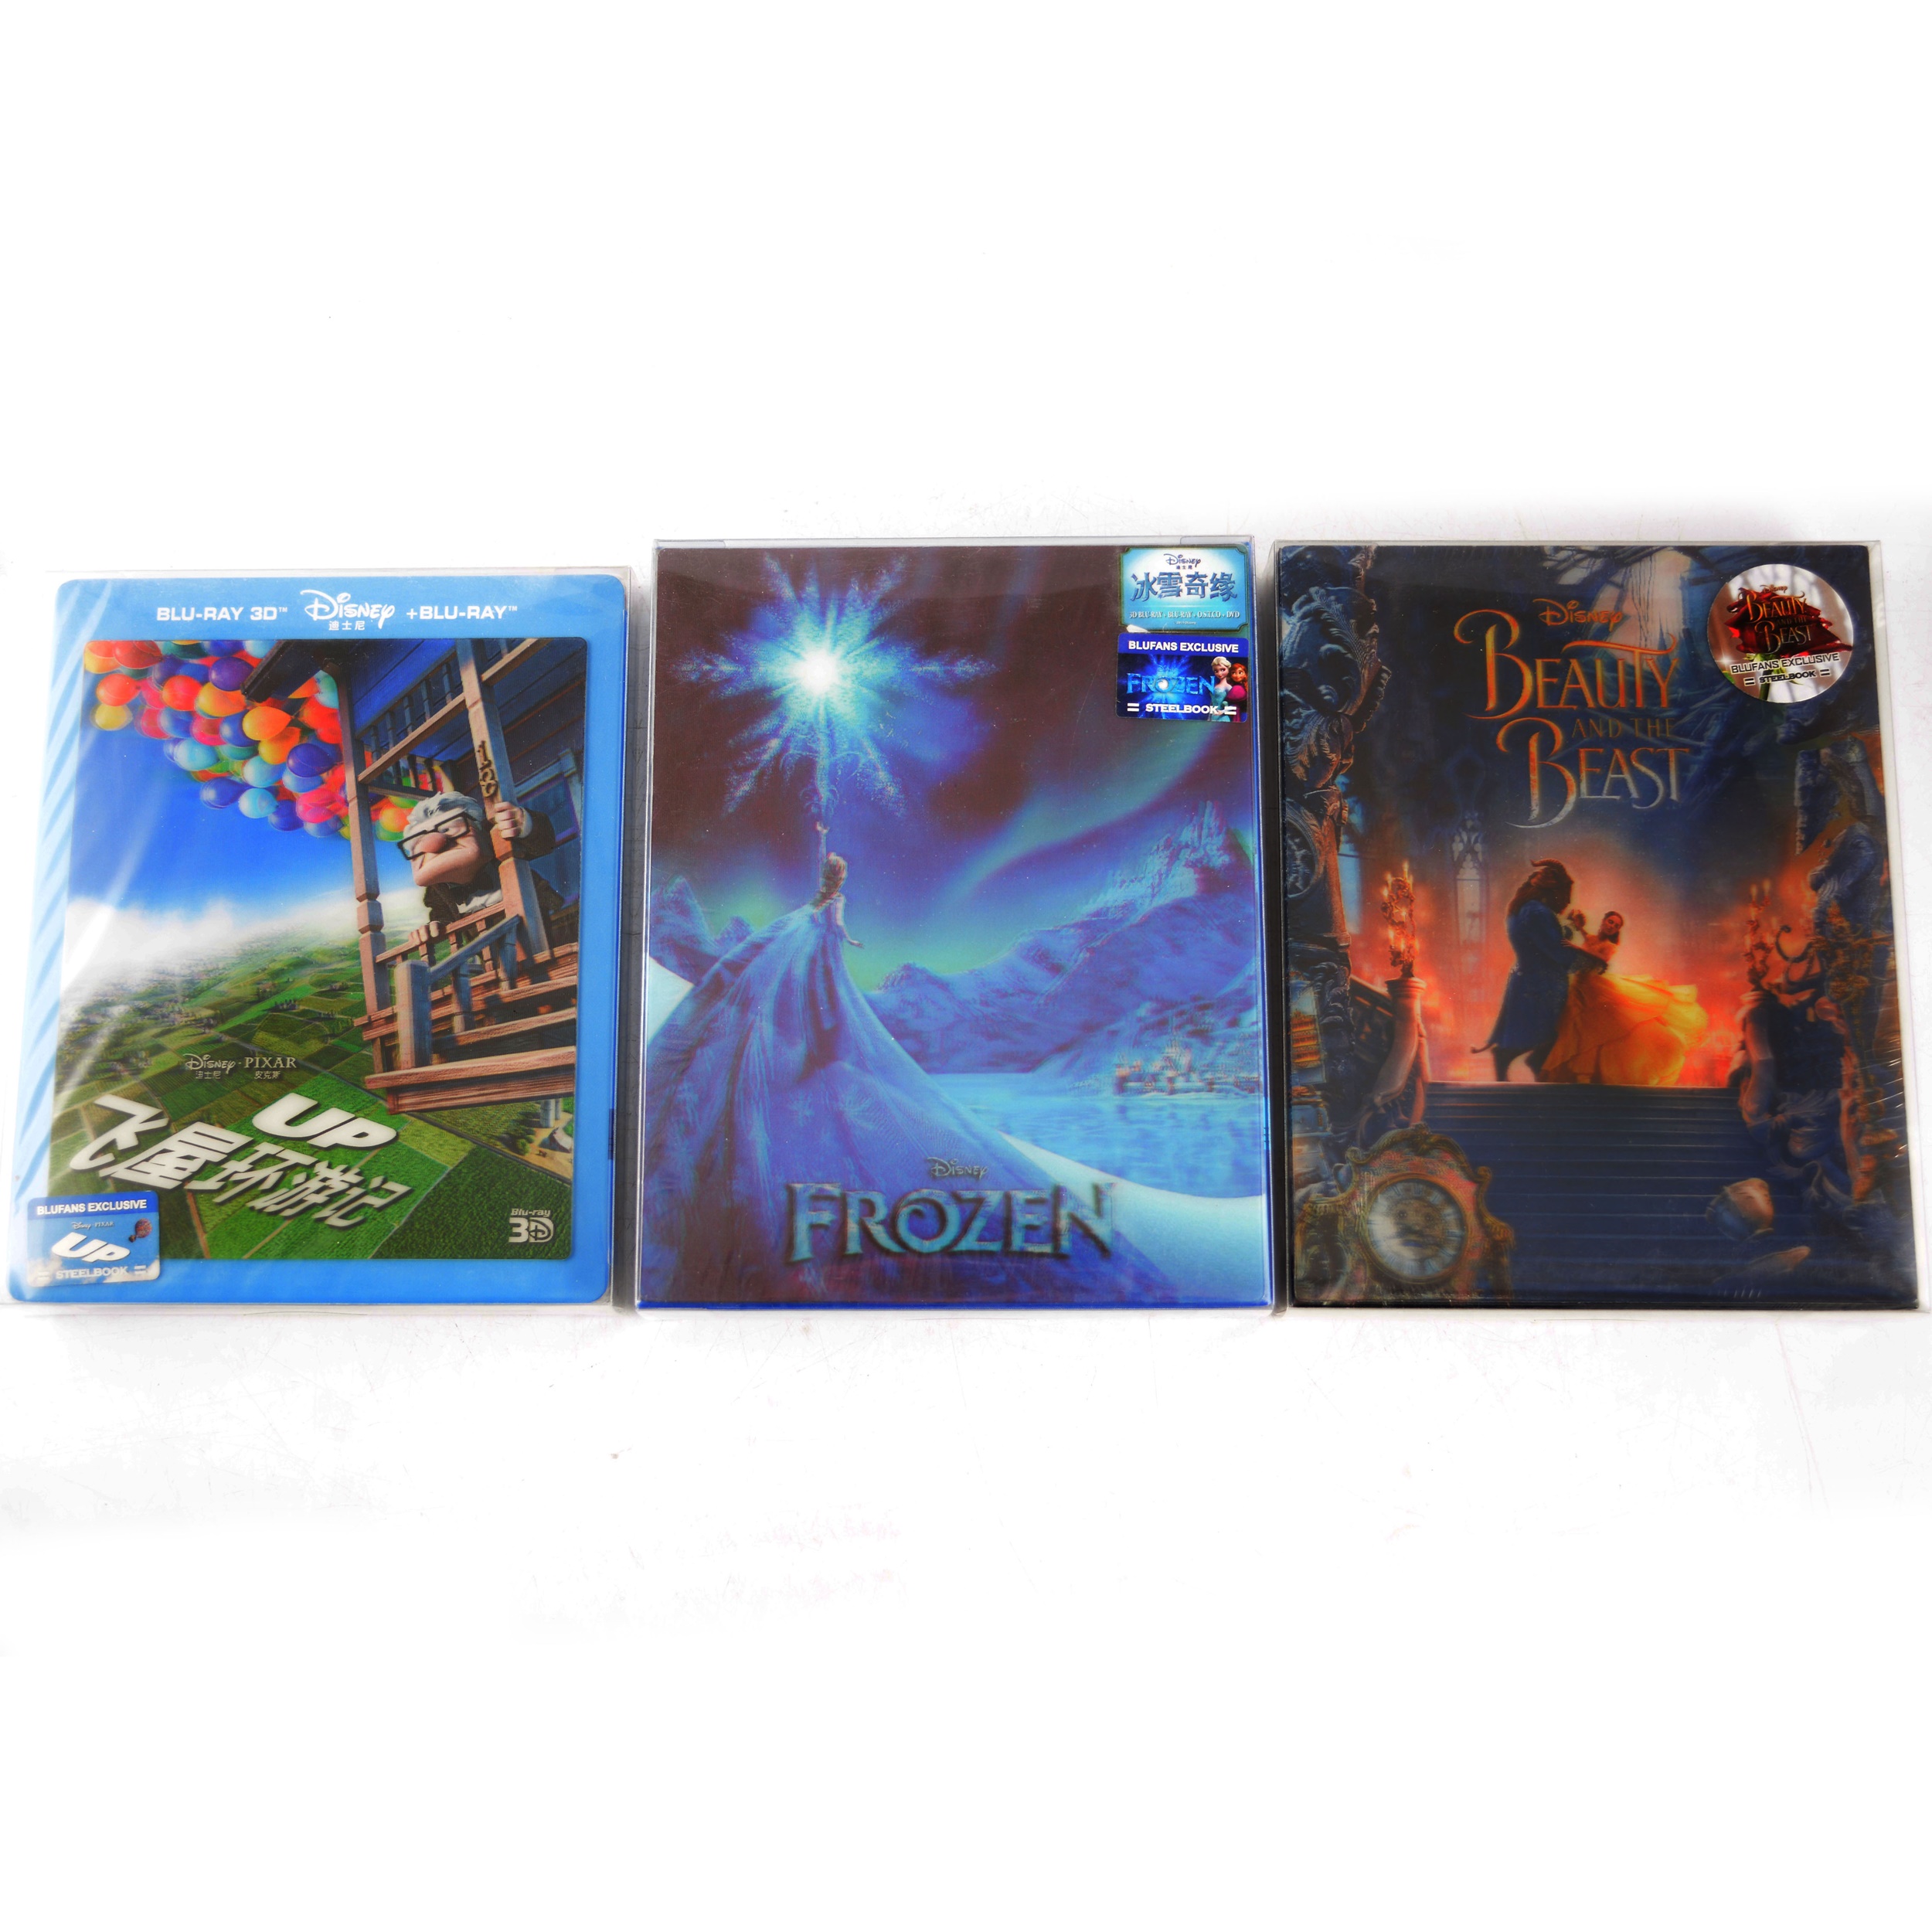 Three Blufans Exclusive Steelbook Lenticular Blu-rays; Frozen, Up, Beauty and the Beast.